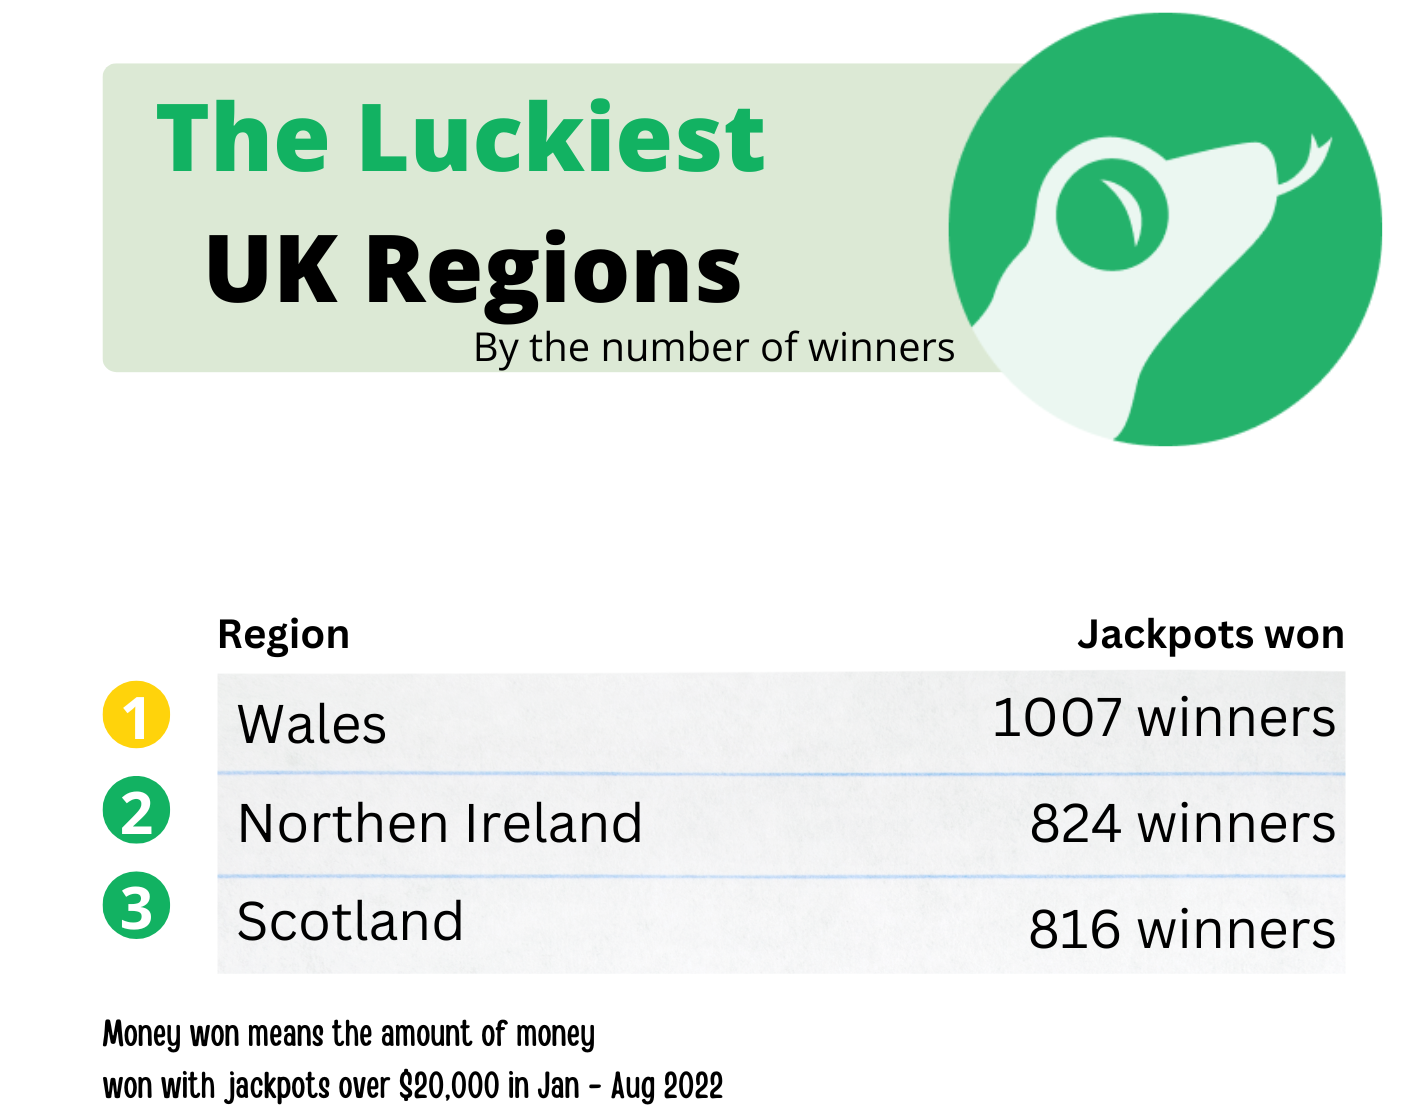 The Luckiest UK Regions by the Number of Winners